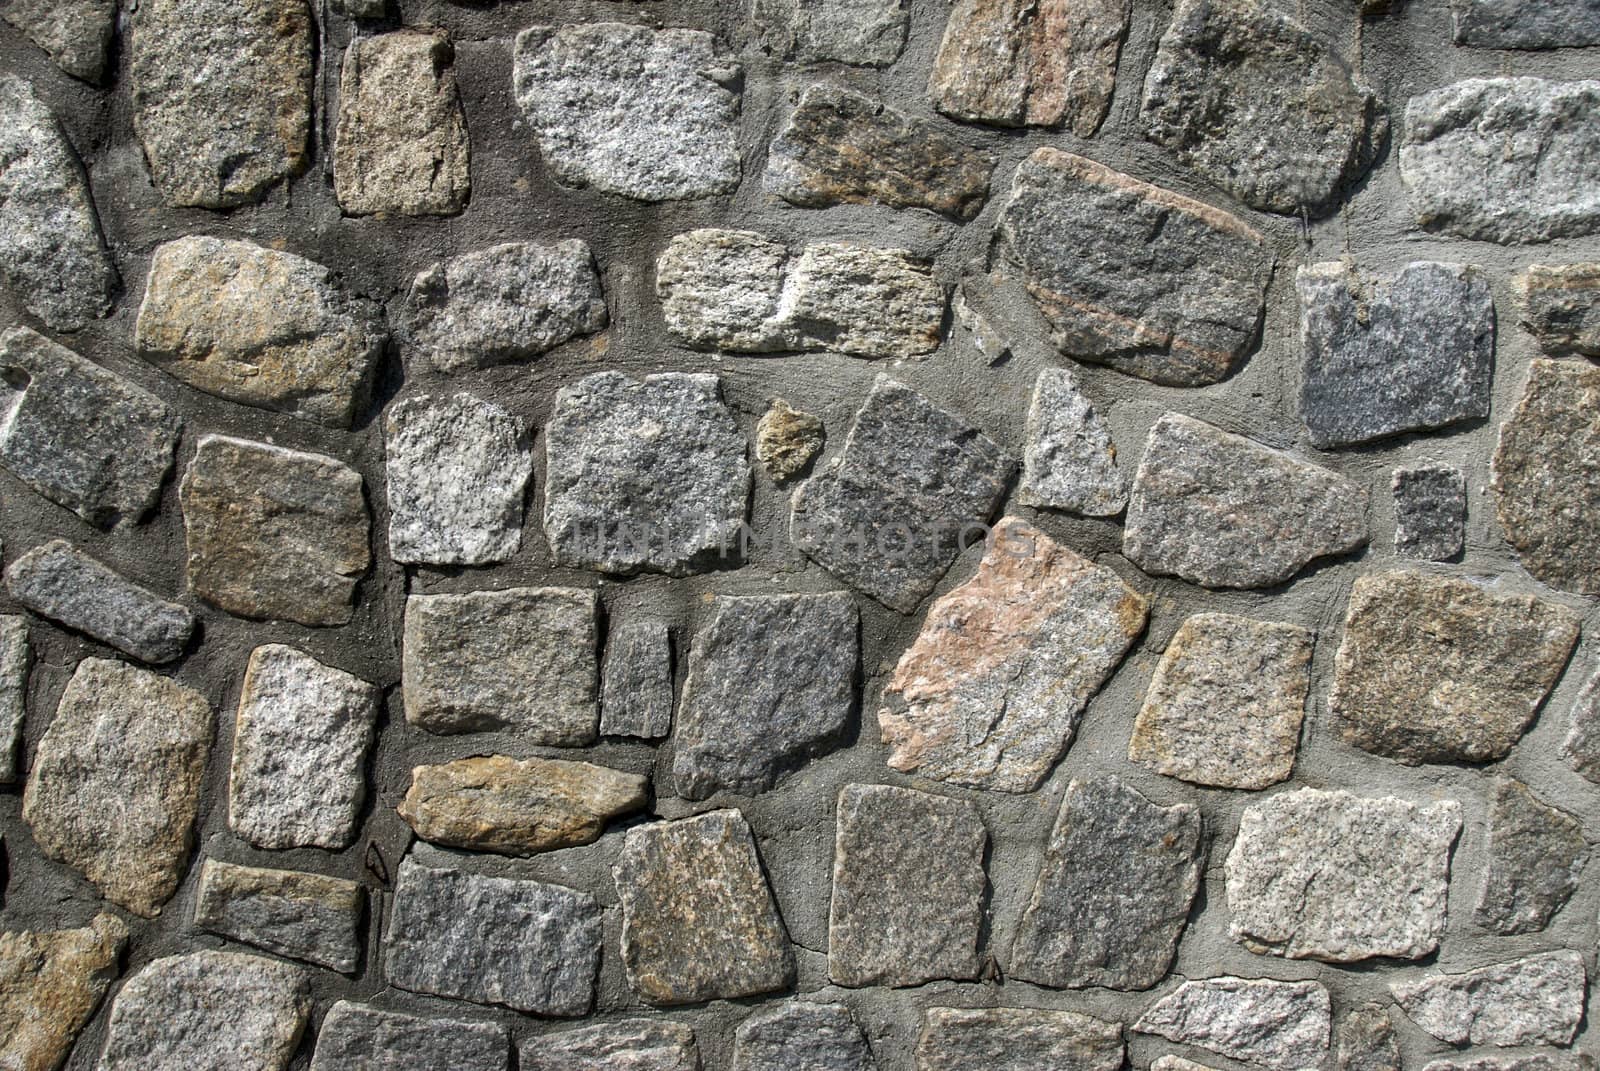 A textured stone wall provides a randomly patterned background